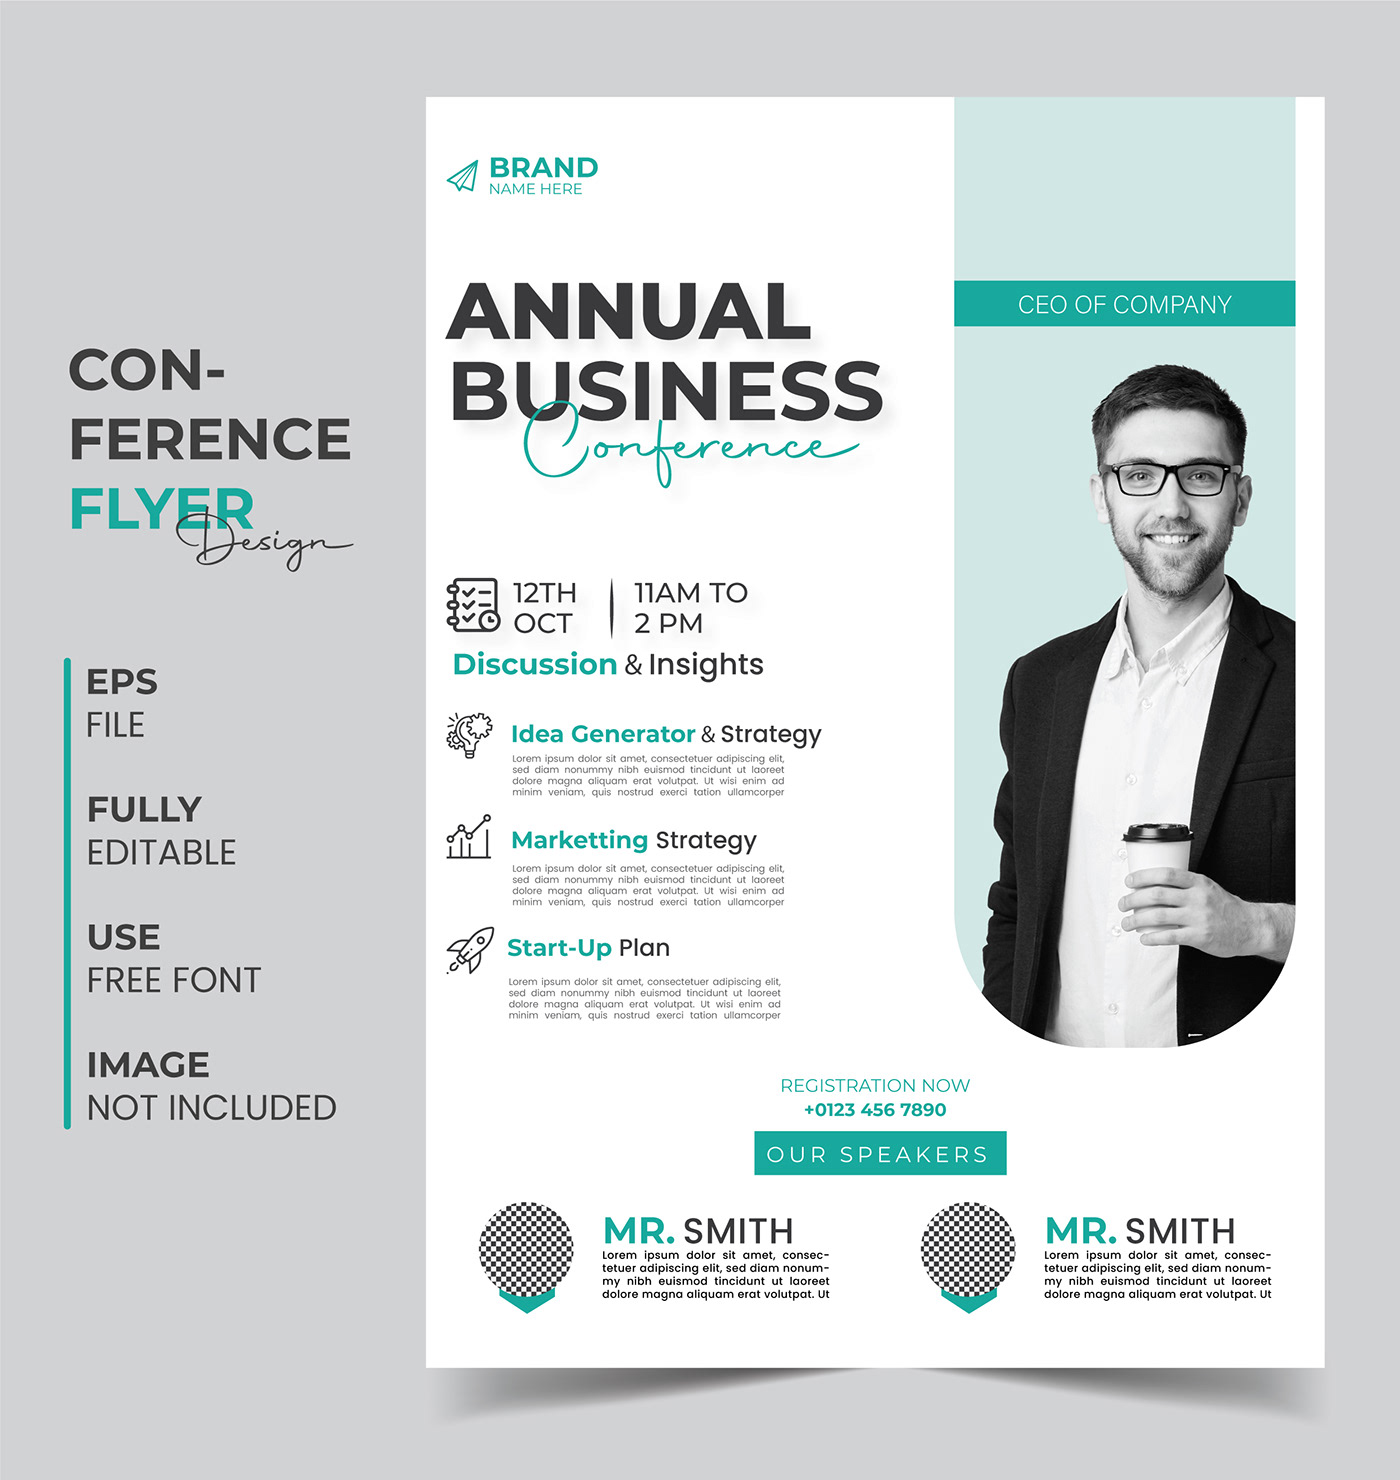 flyer Flyer Design flyer template print ready conference conference flyer business flyer Corporate Flyer Design Meeting Flyer